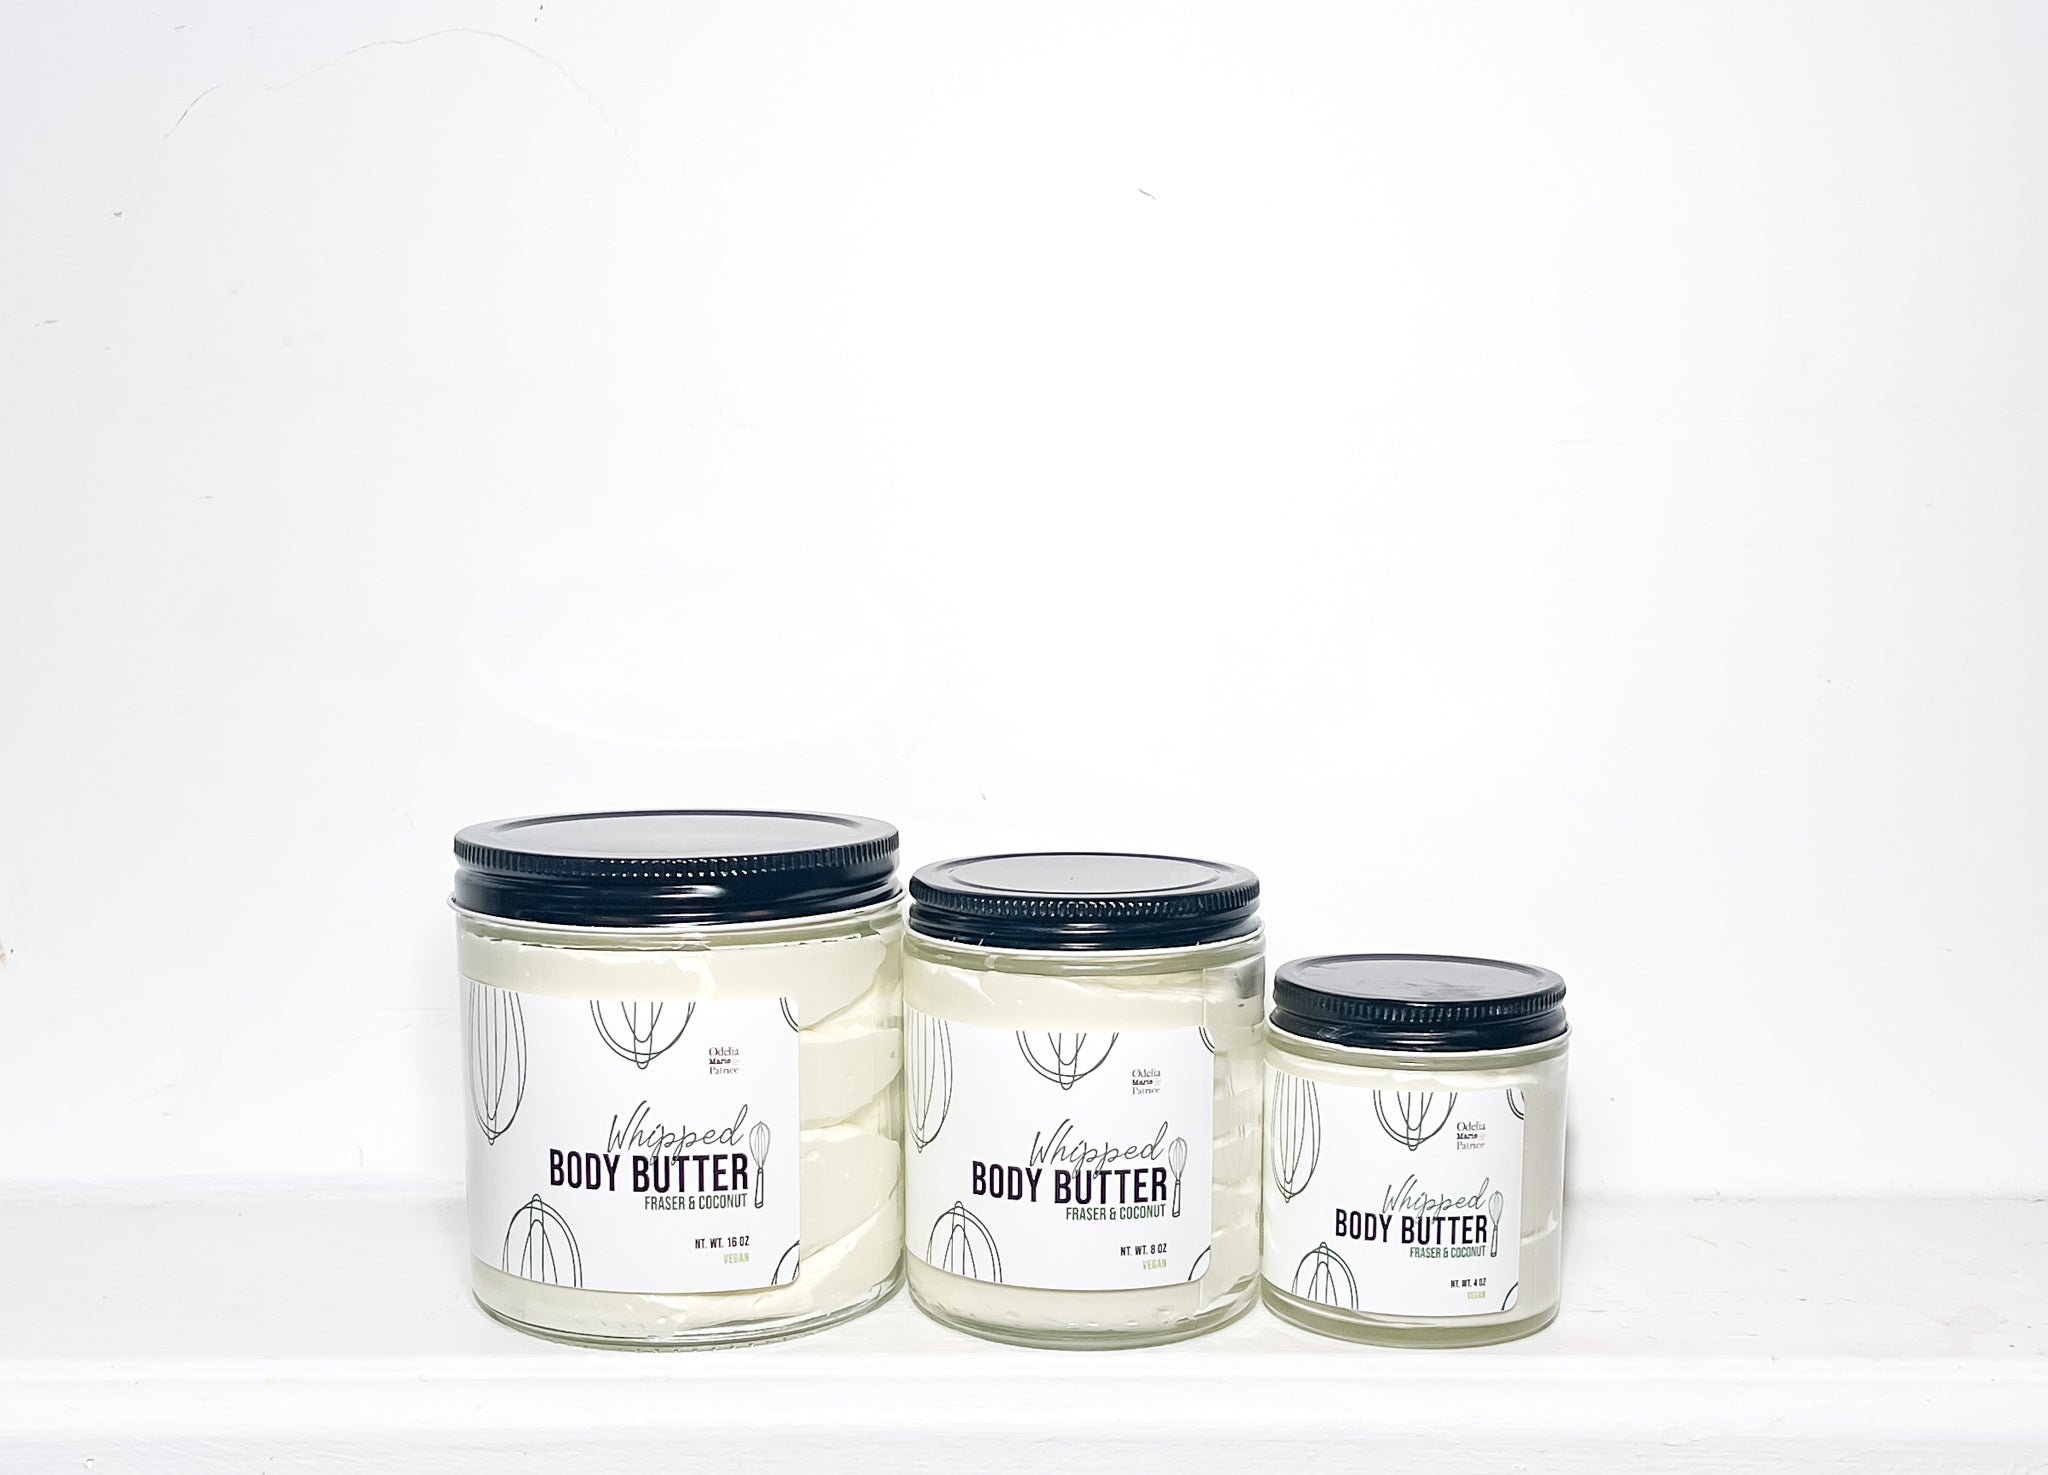 Whipped Body Butter – Odelia, Marie, & Patrice